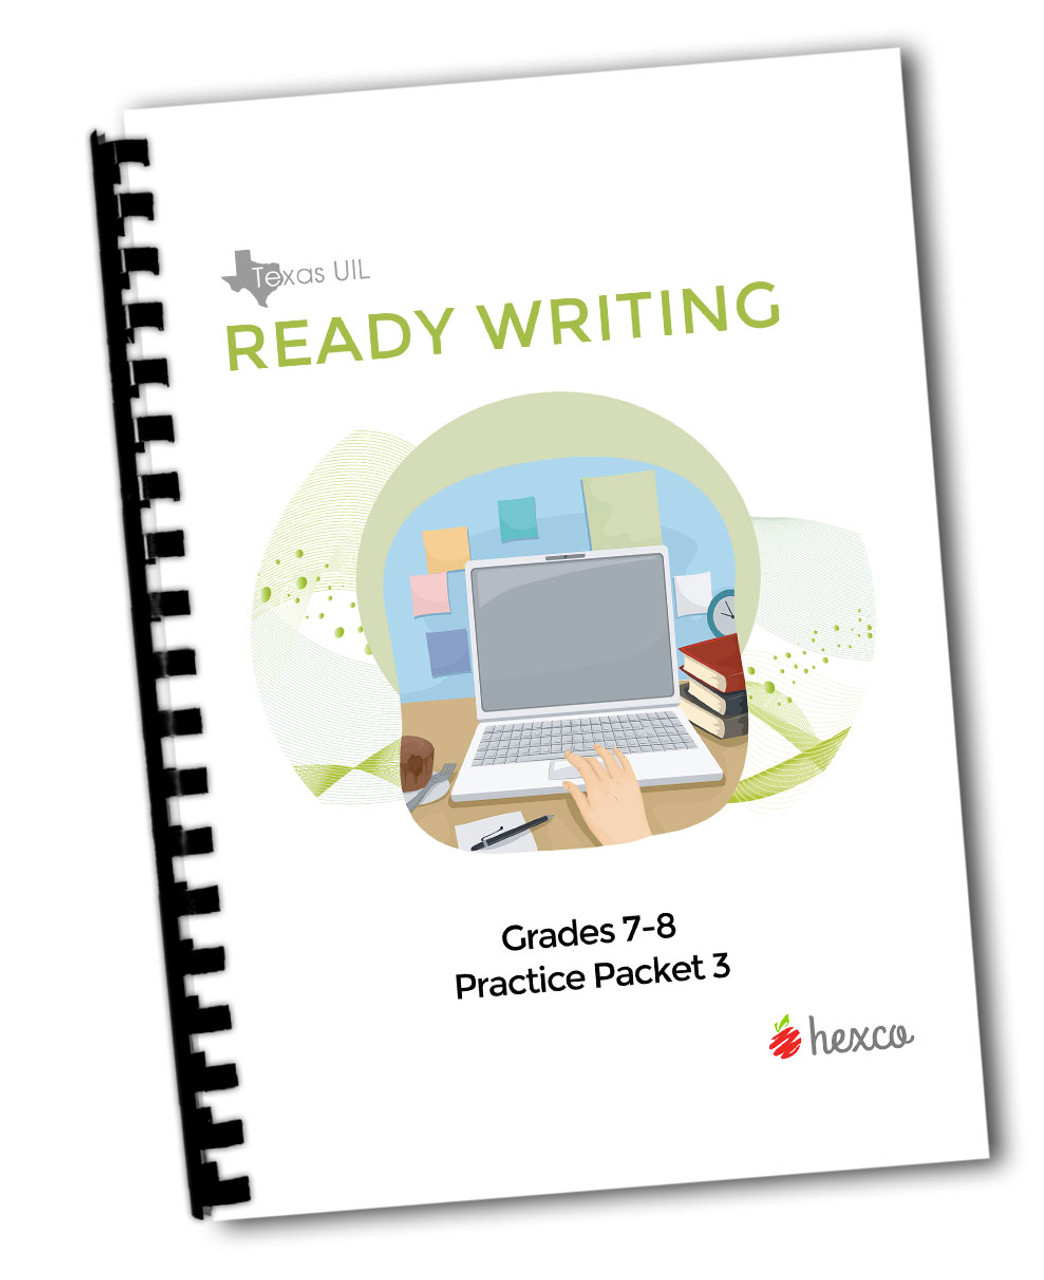 uil-ready-writing-help-uil-ready-writing-samples